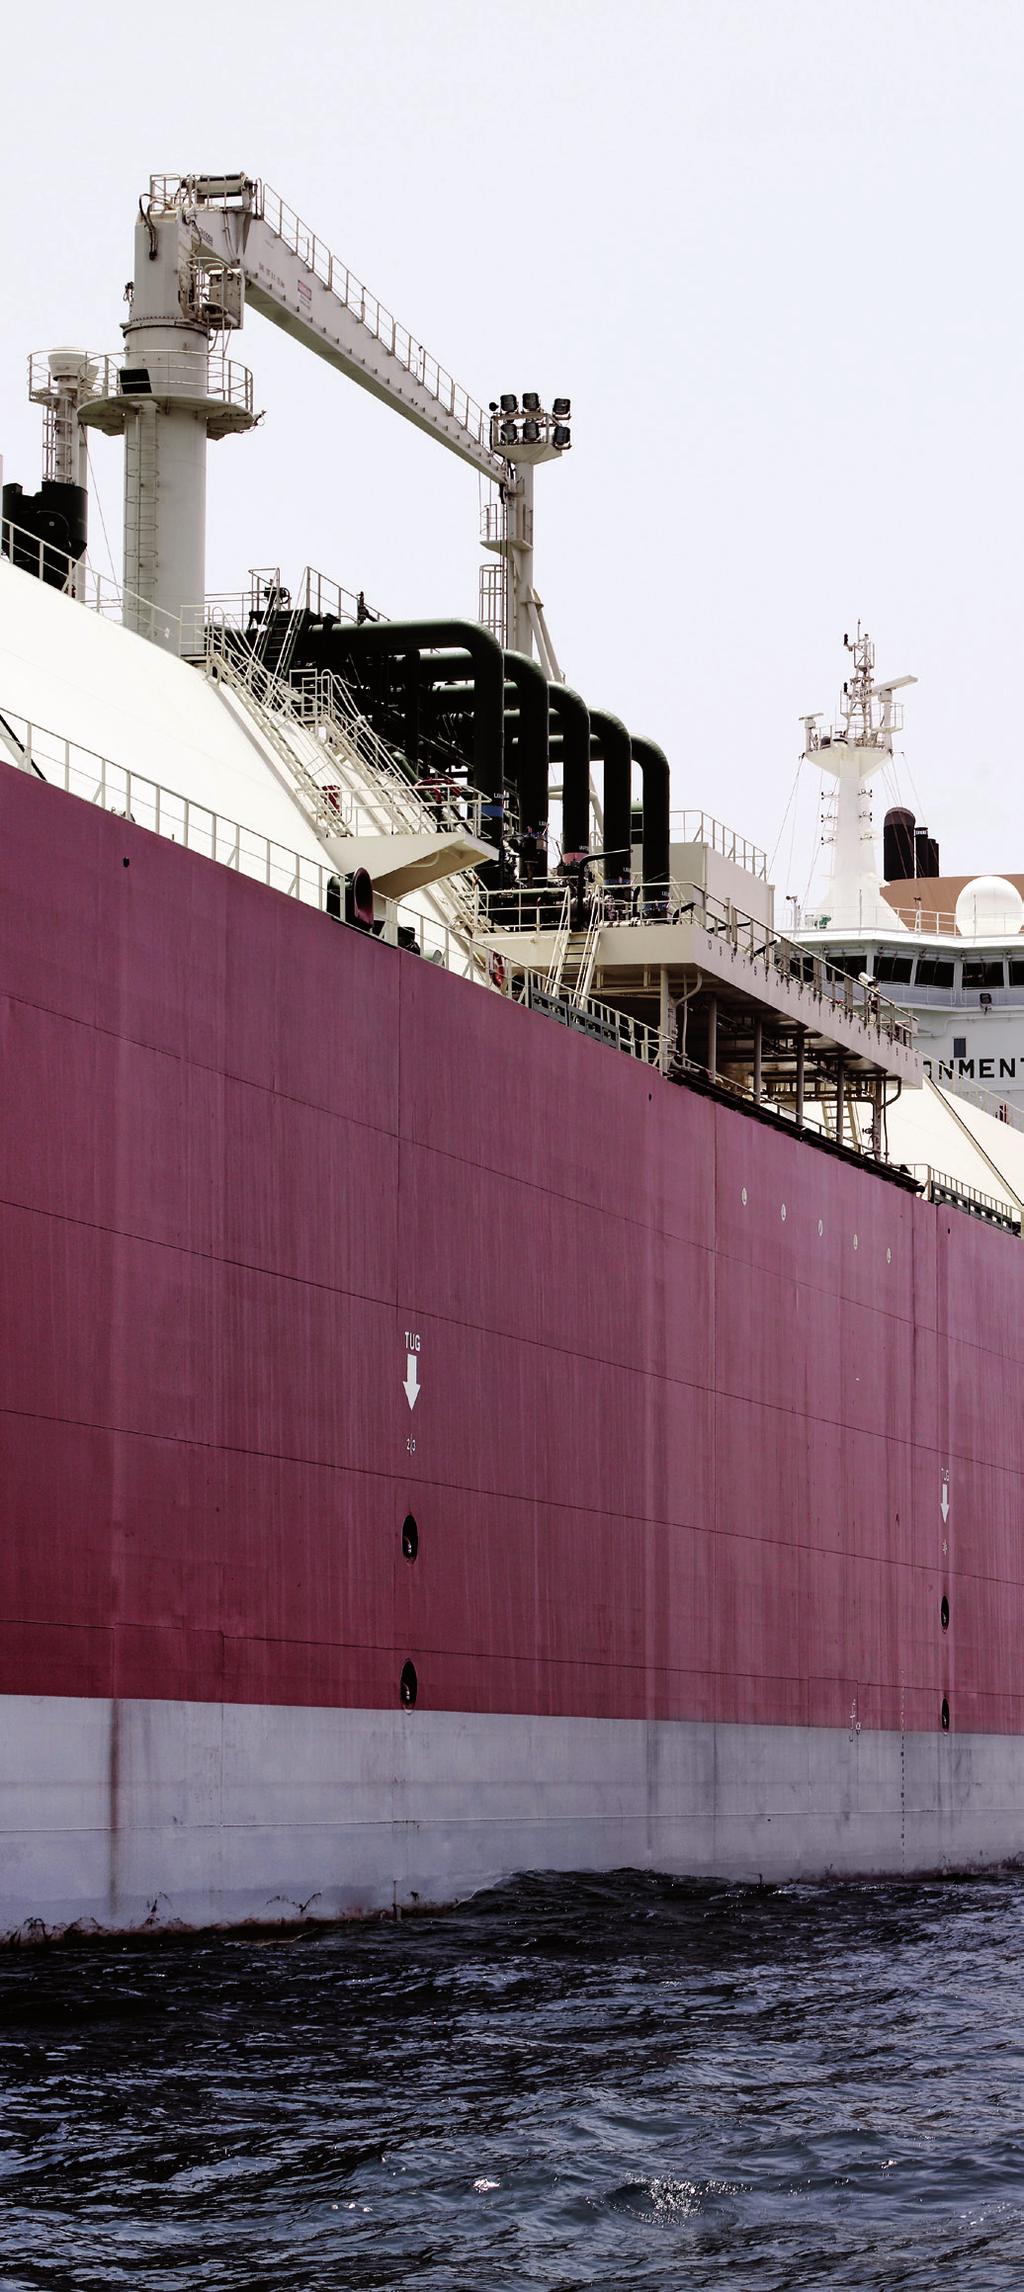 Rosemount Custody Transfer System A history of quality To verify the seller-buyer agreement and maintain a profitable business, it s vital that LNG carriers can measure custody transfer with absolute